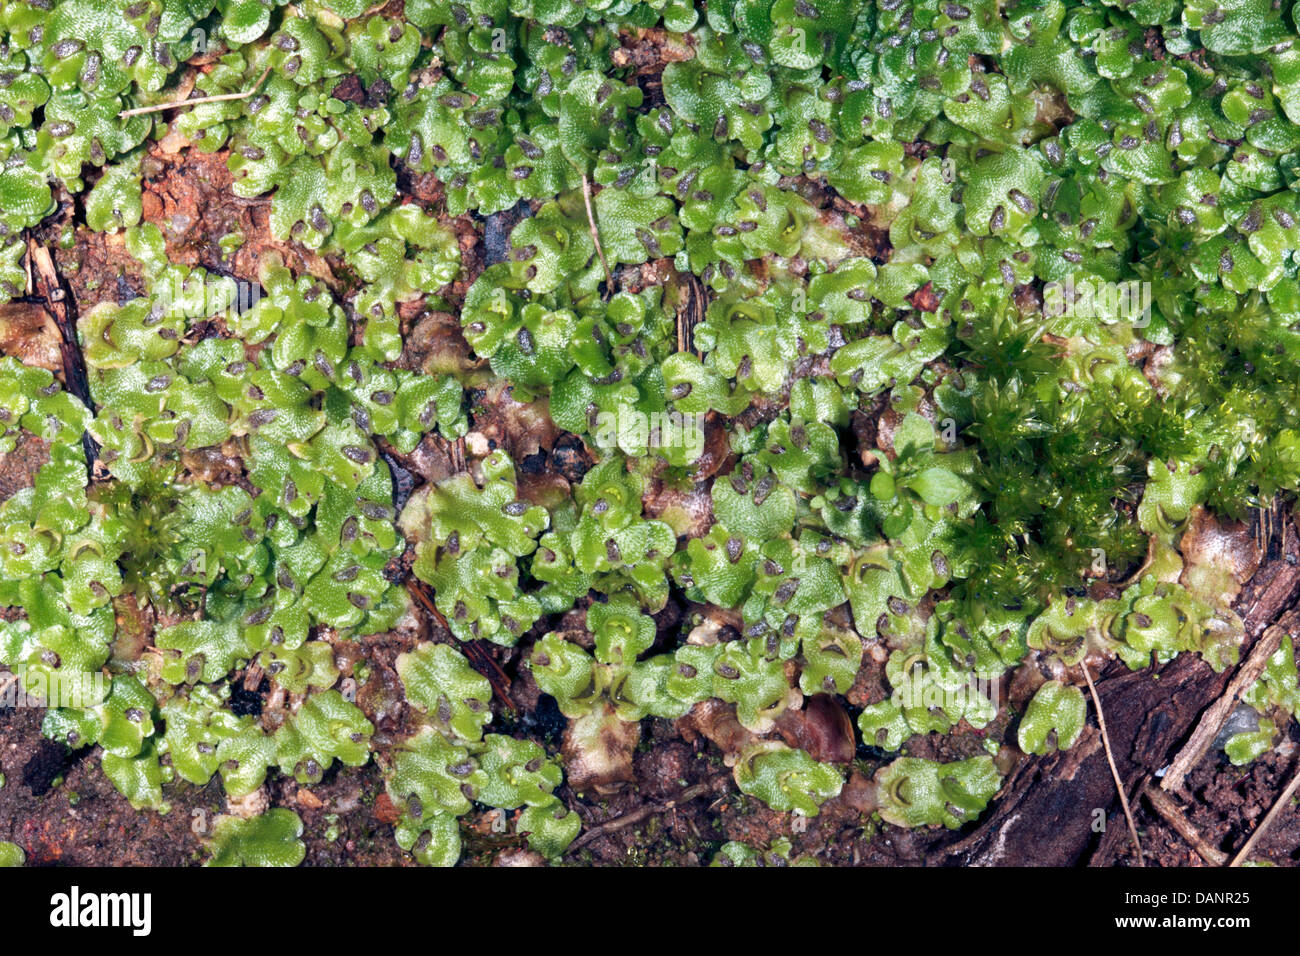 Close-up of  the Thallose Liverwort Lunularia cruciata with Gemmae in Cups Stock Photo